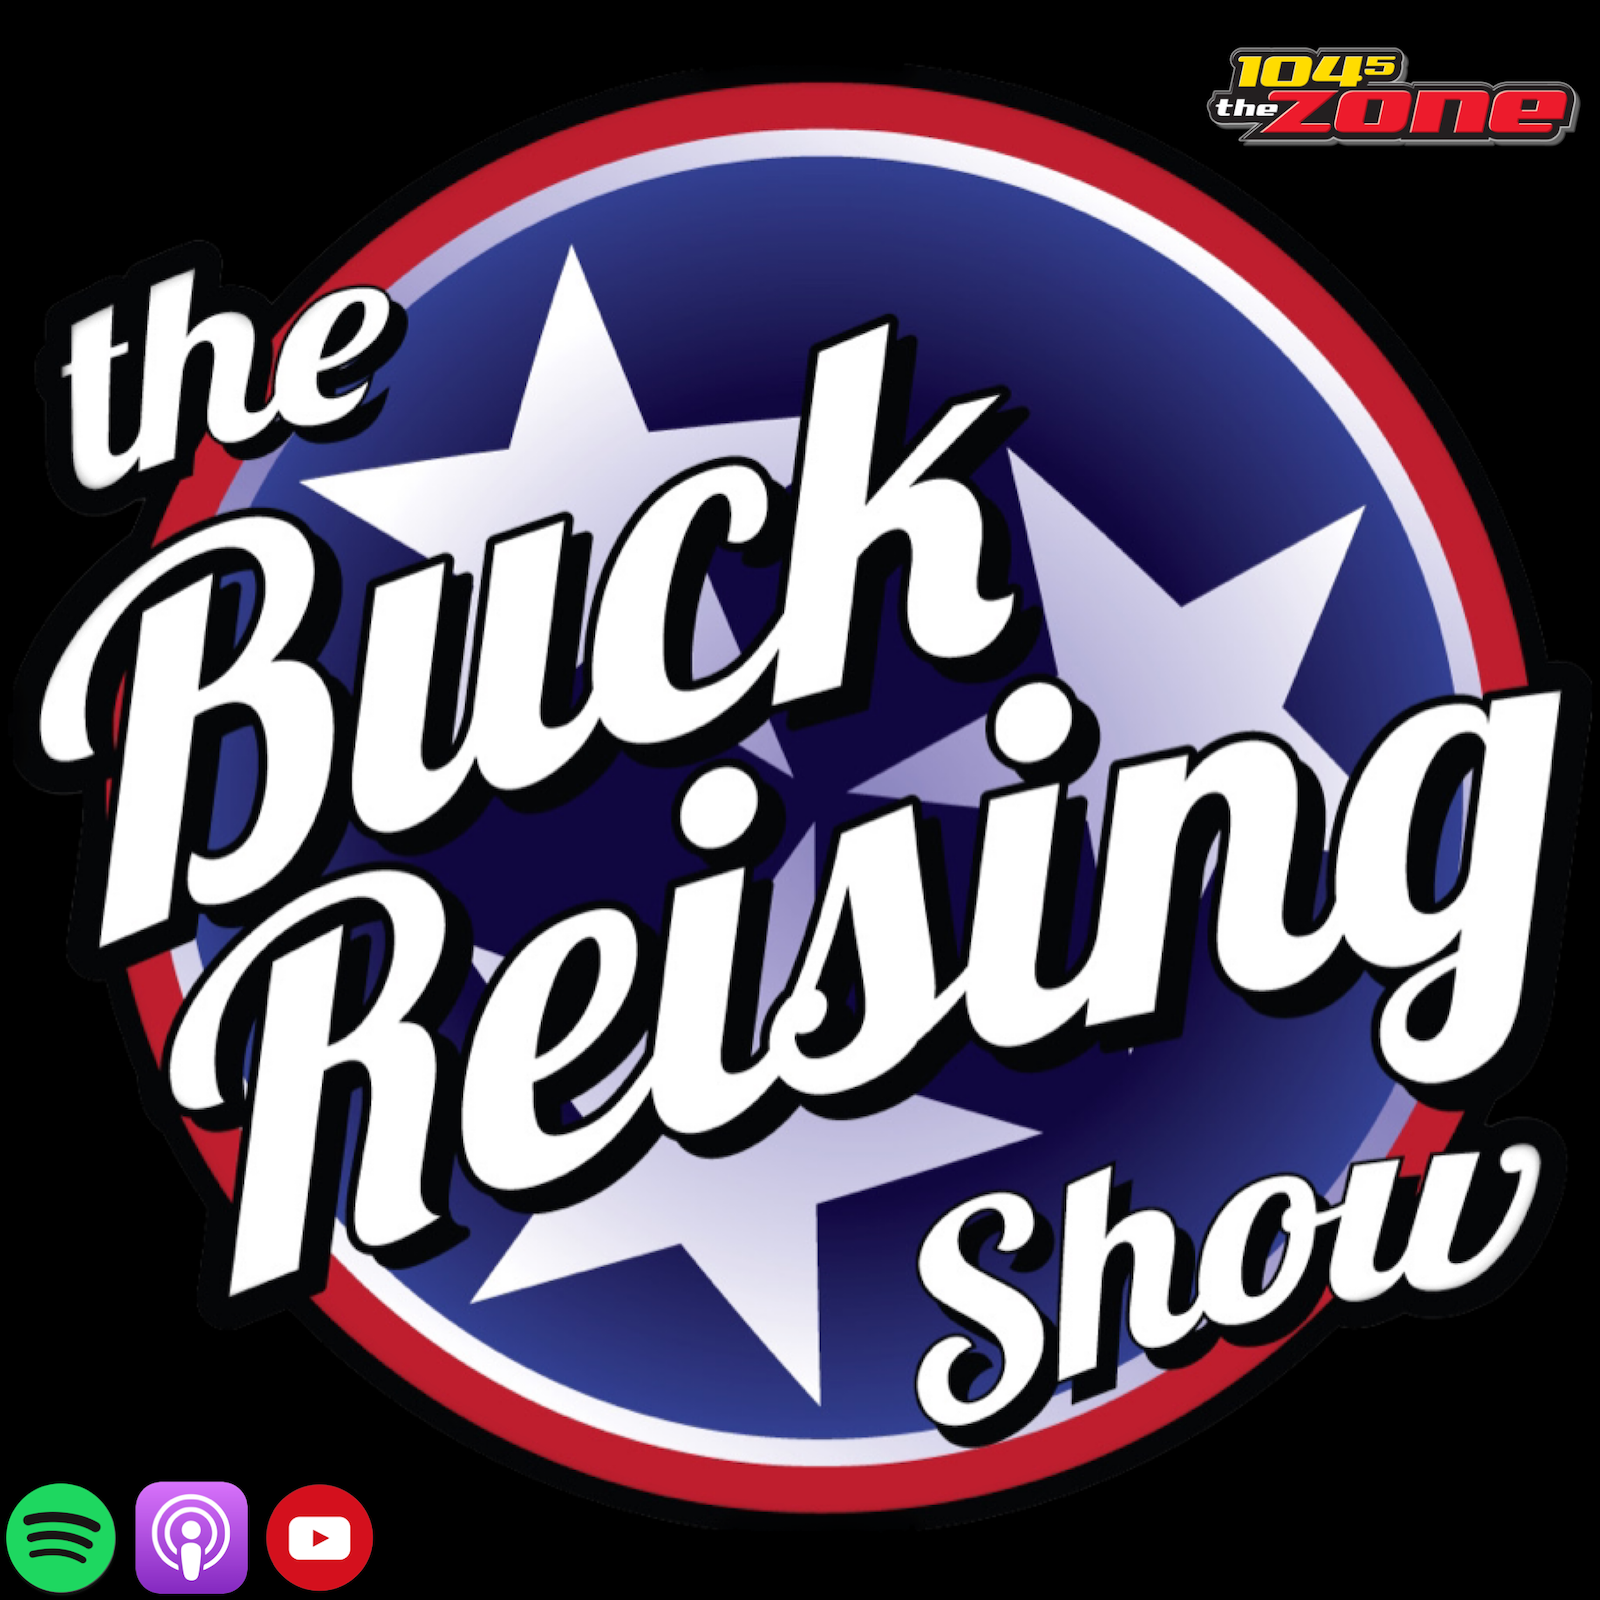 The Buck Reising Show Hour 1: Emory Hunt + What is Deion doing?